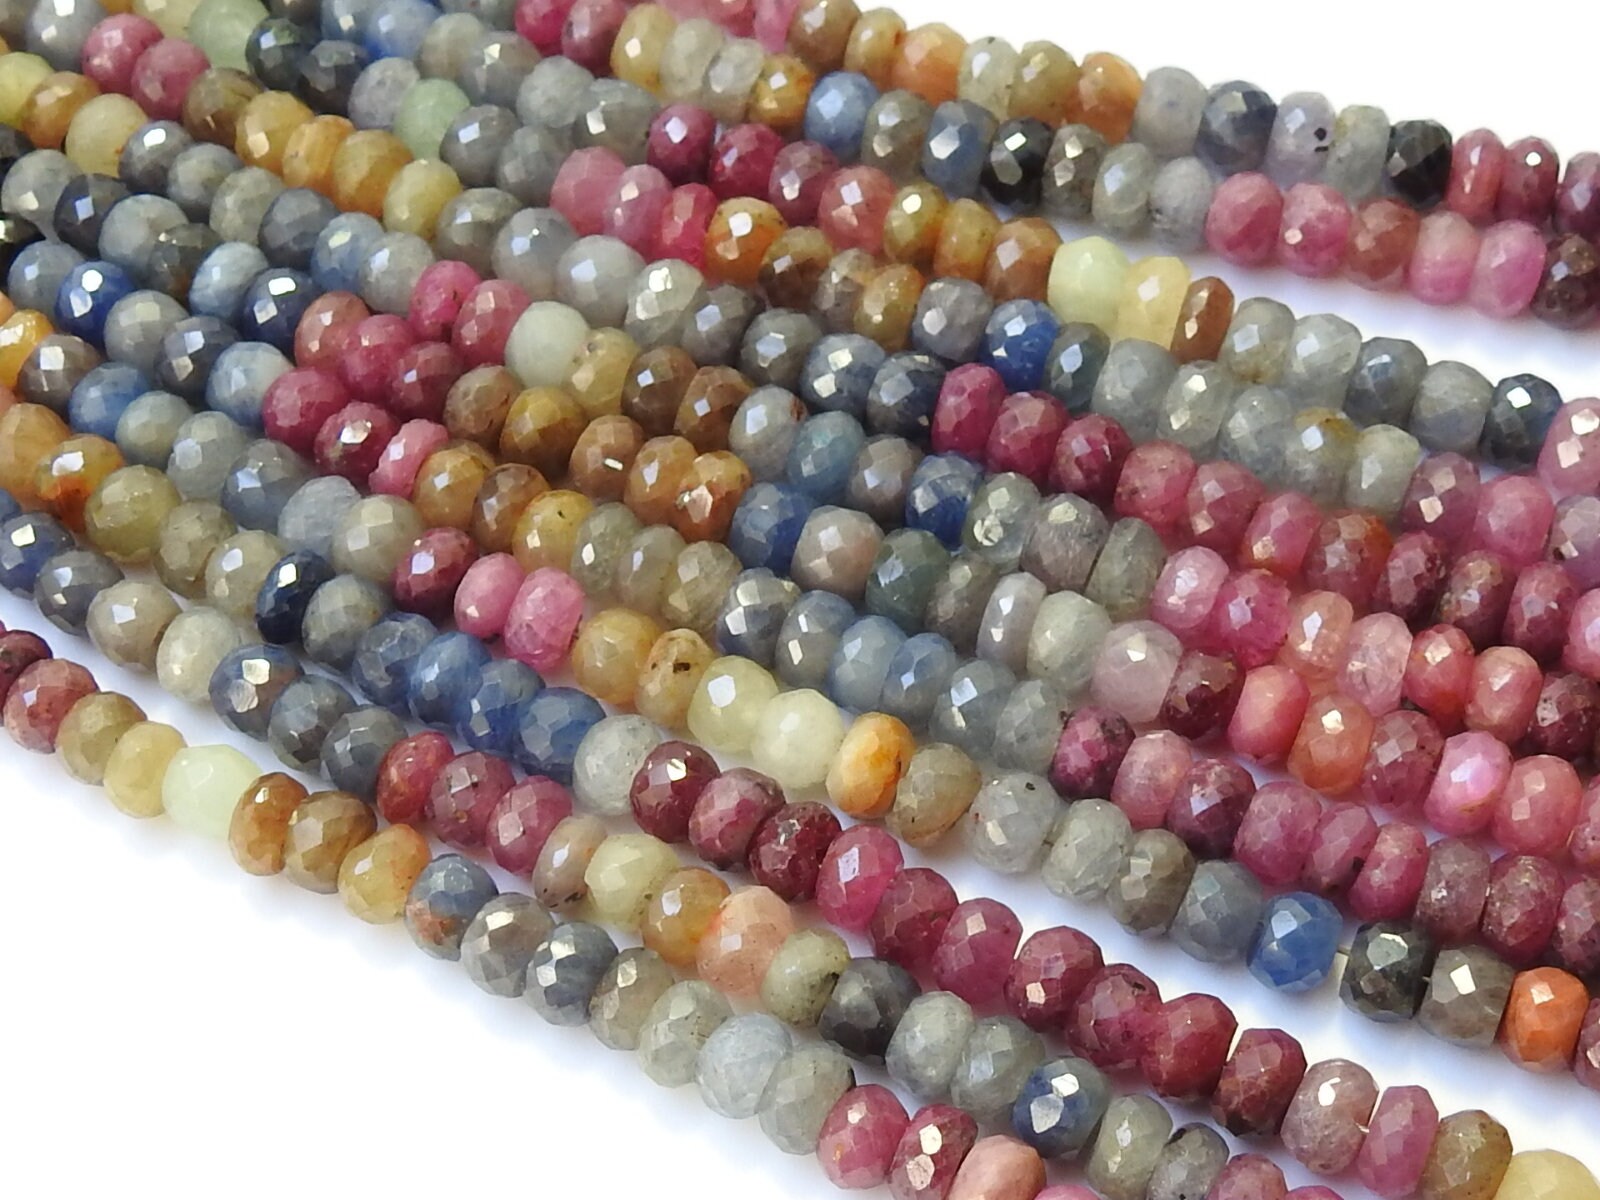 100%Natural,Sapphire Faceted Roundel Bead,Multi Shaded,Loose Stone,Necklace,For Making Jewelry,Wholesaler,Supplies,16Inch Strand PME(B13) | Save 33% - Rajasthan Living 16